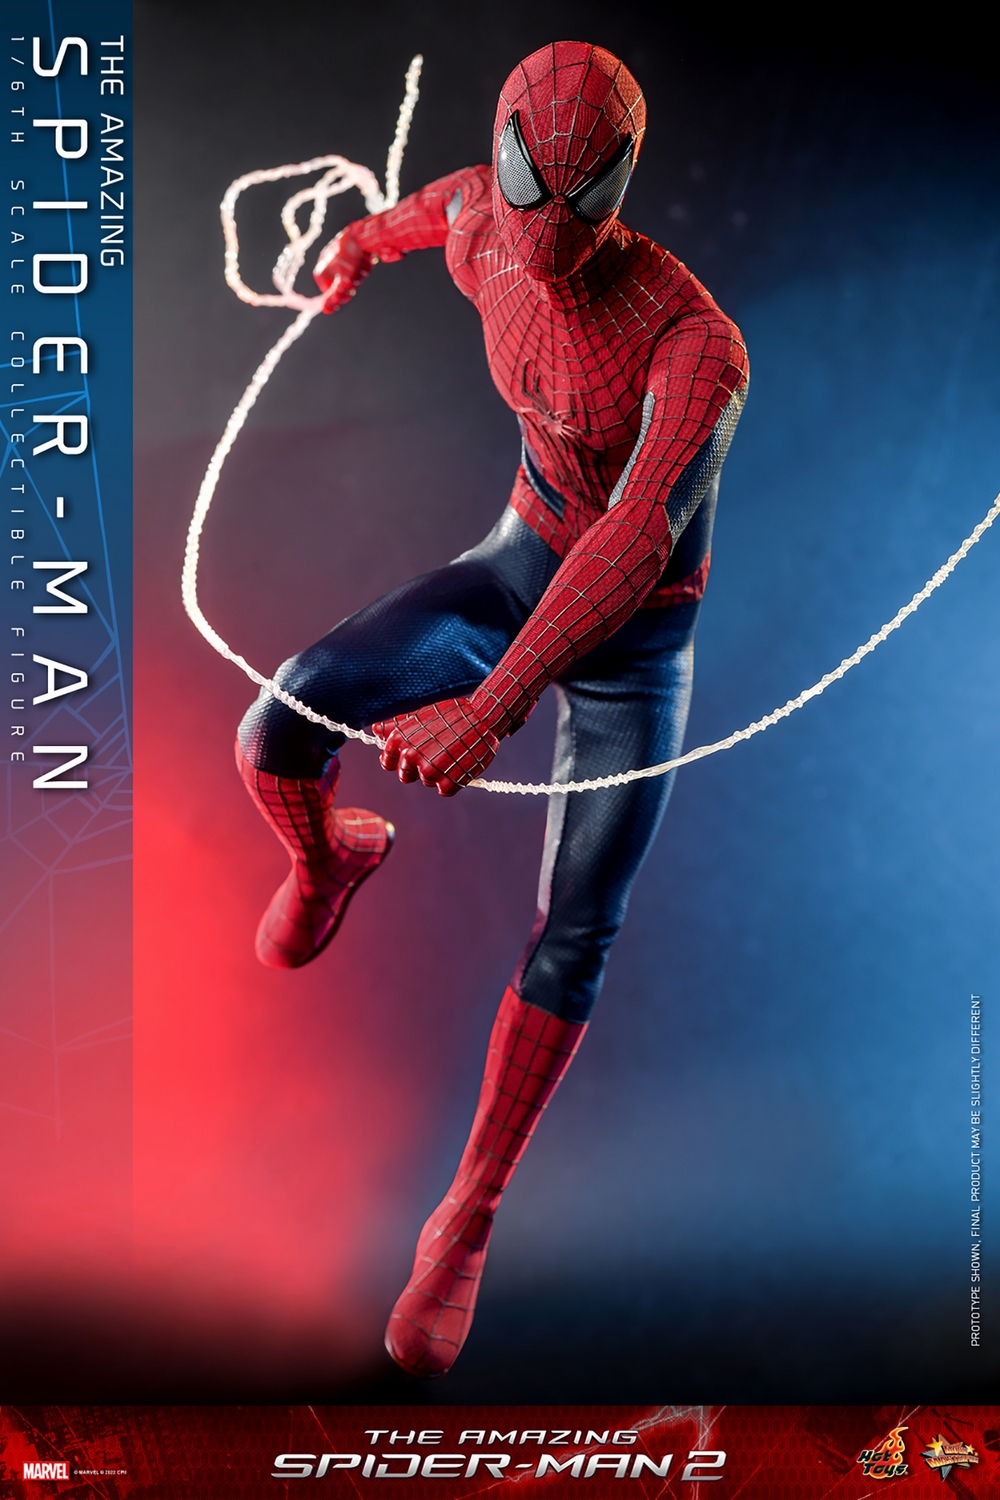 the-amazing-spider-man_marvel_gallery_6414d09ad2d92.jpg